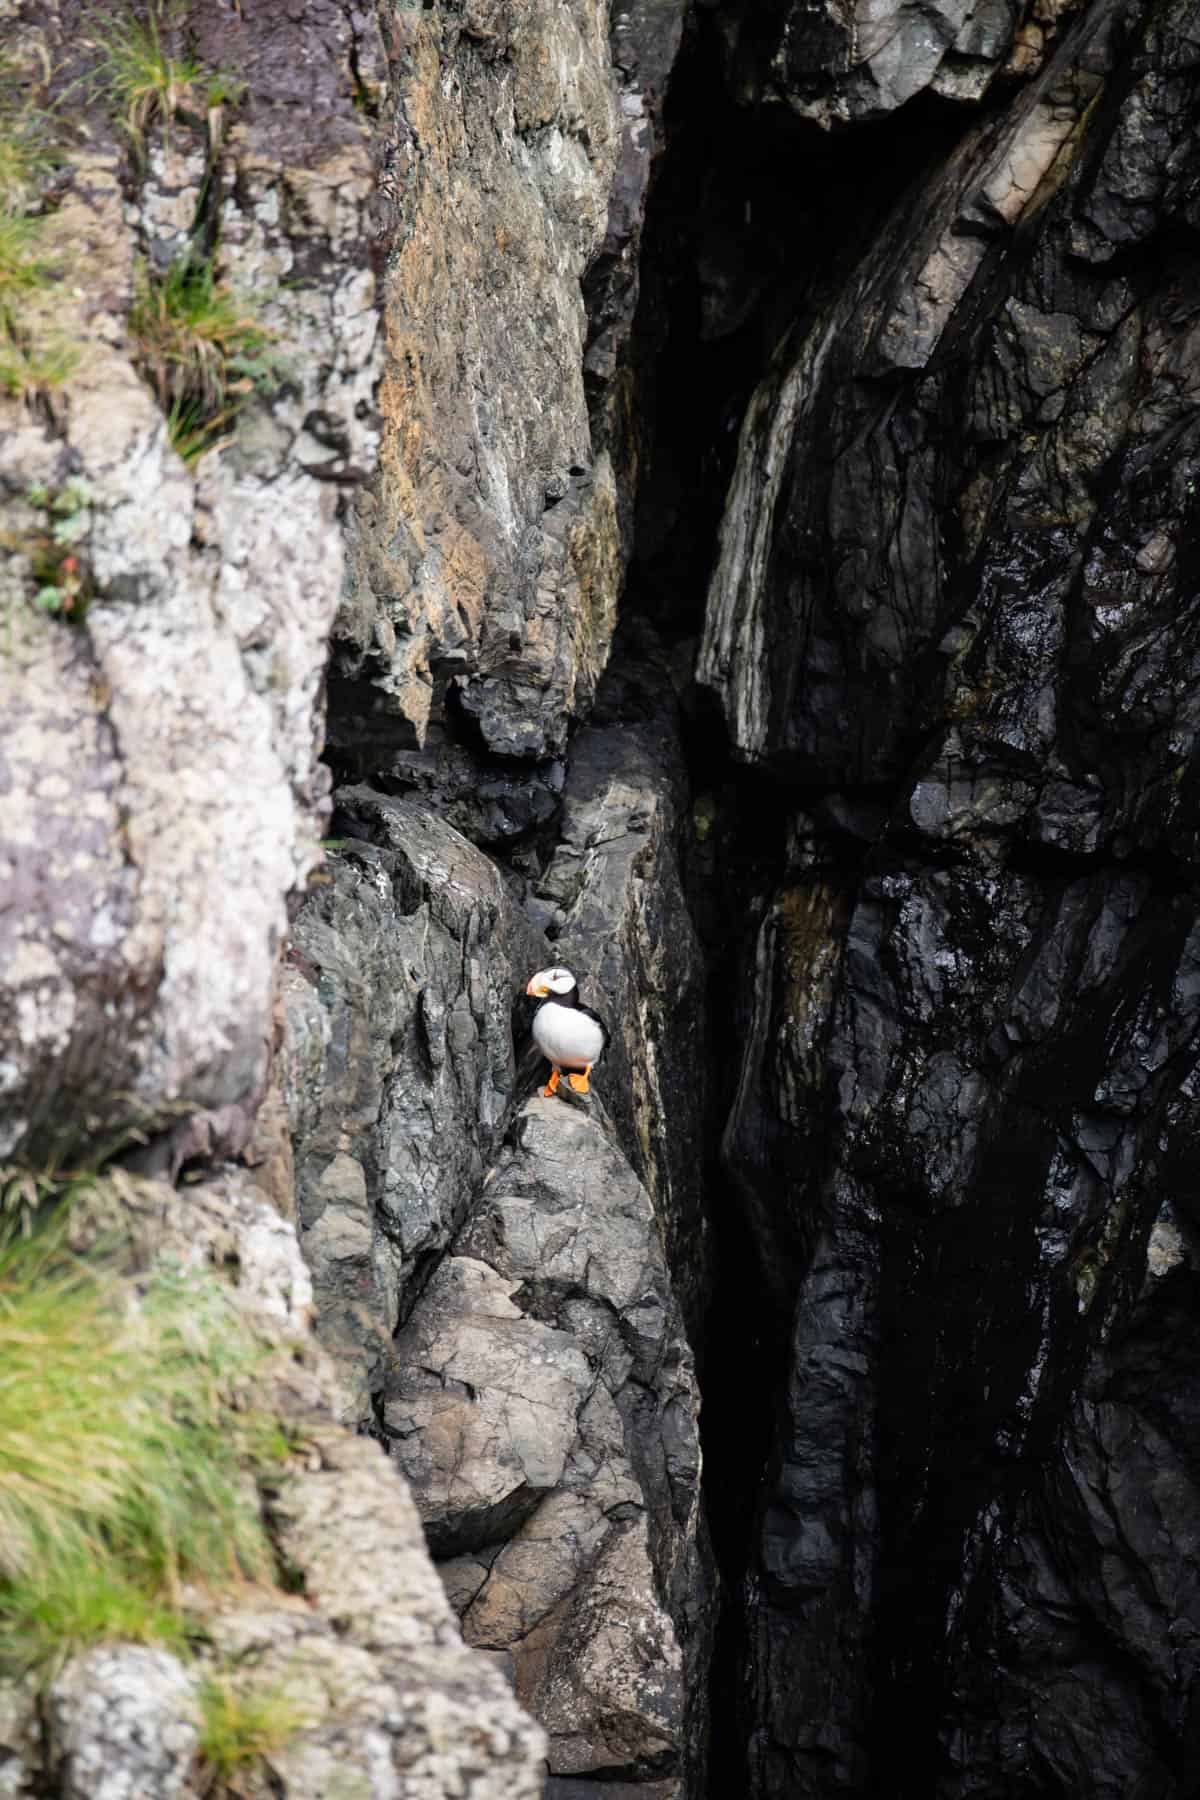 An image of a puffin on a rock.